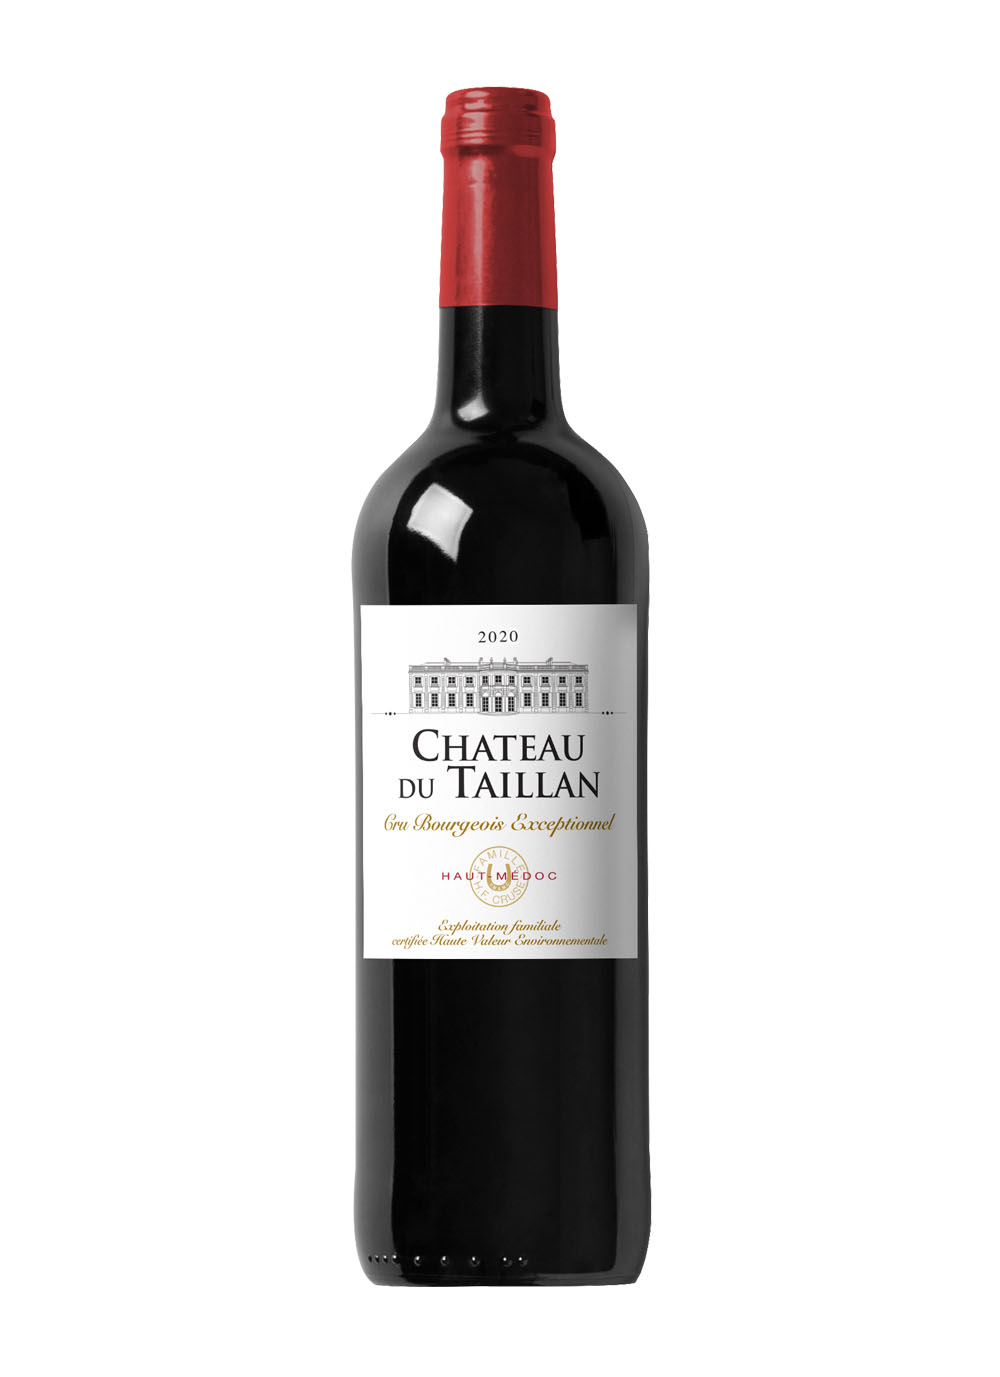 Taillan 2020 - Cru Bourgeois Exceptionnel